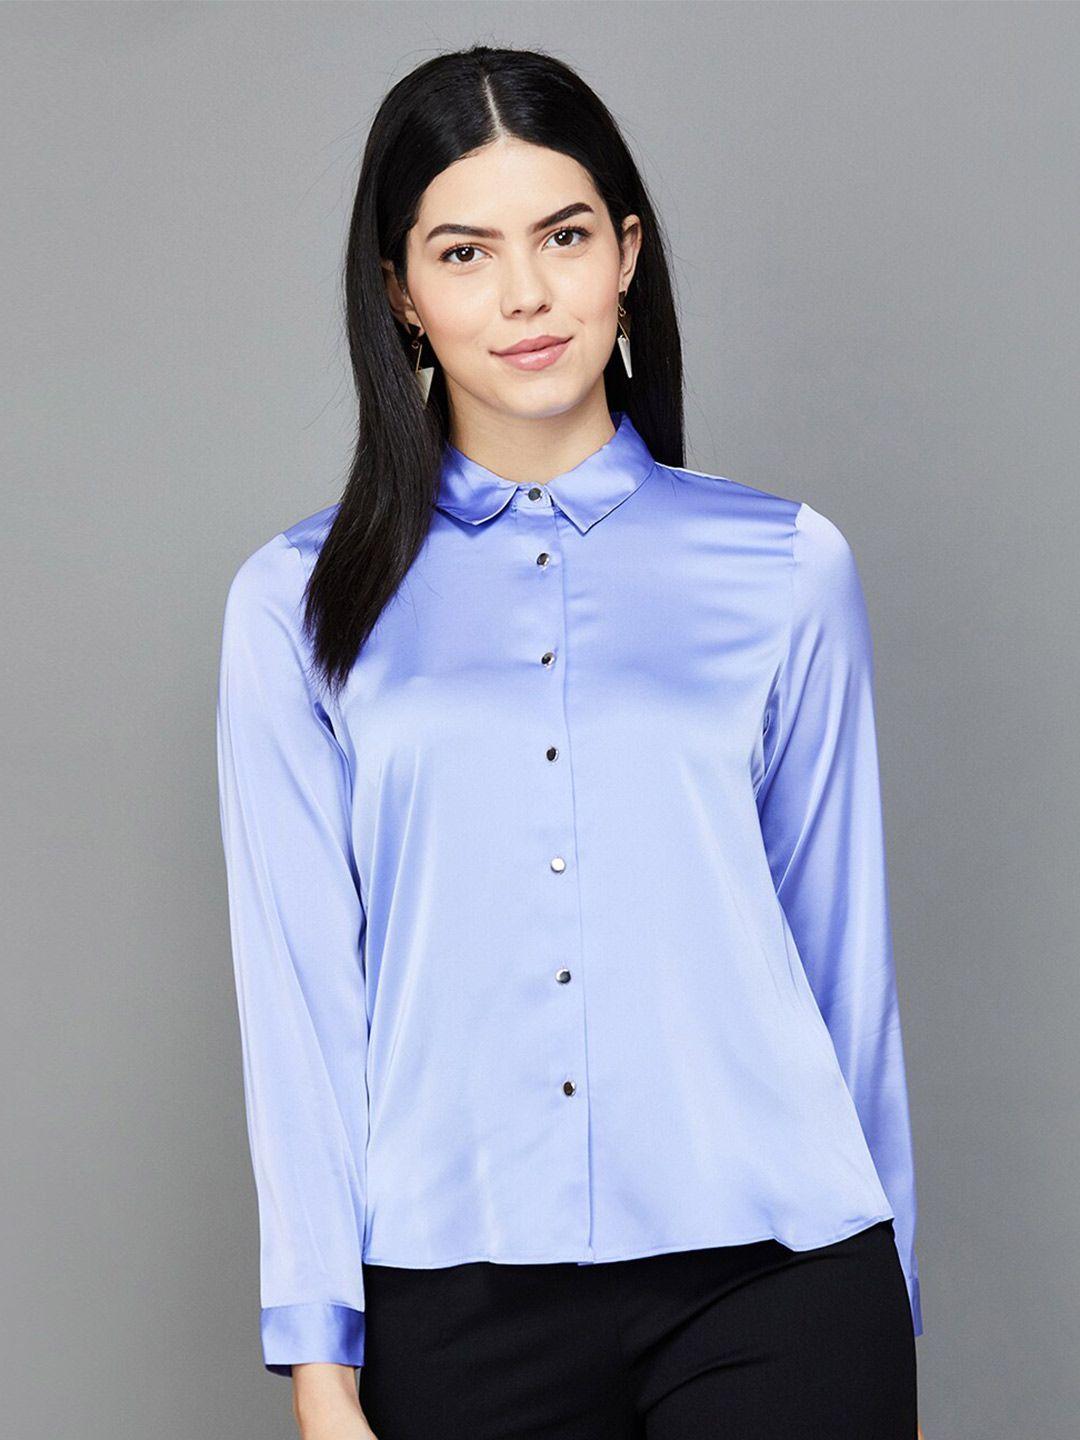 code by lifestyle shirt style top